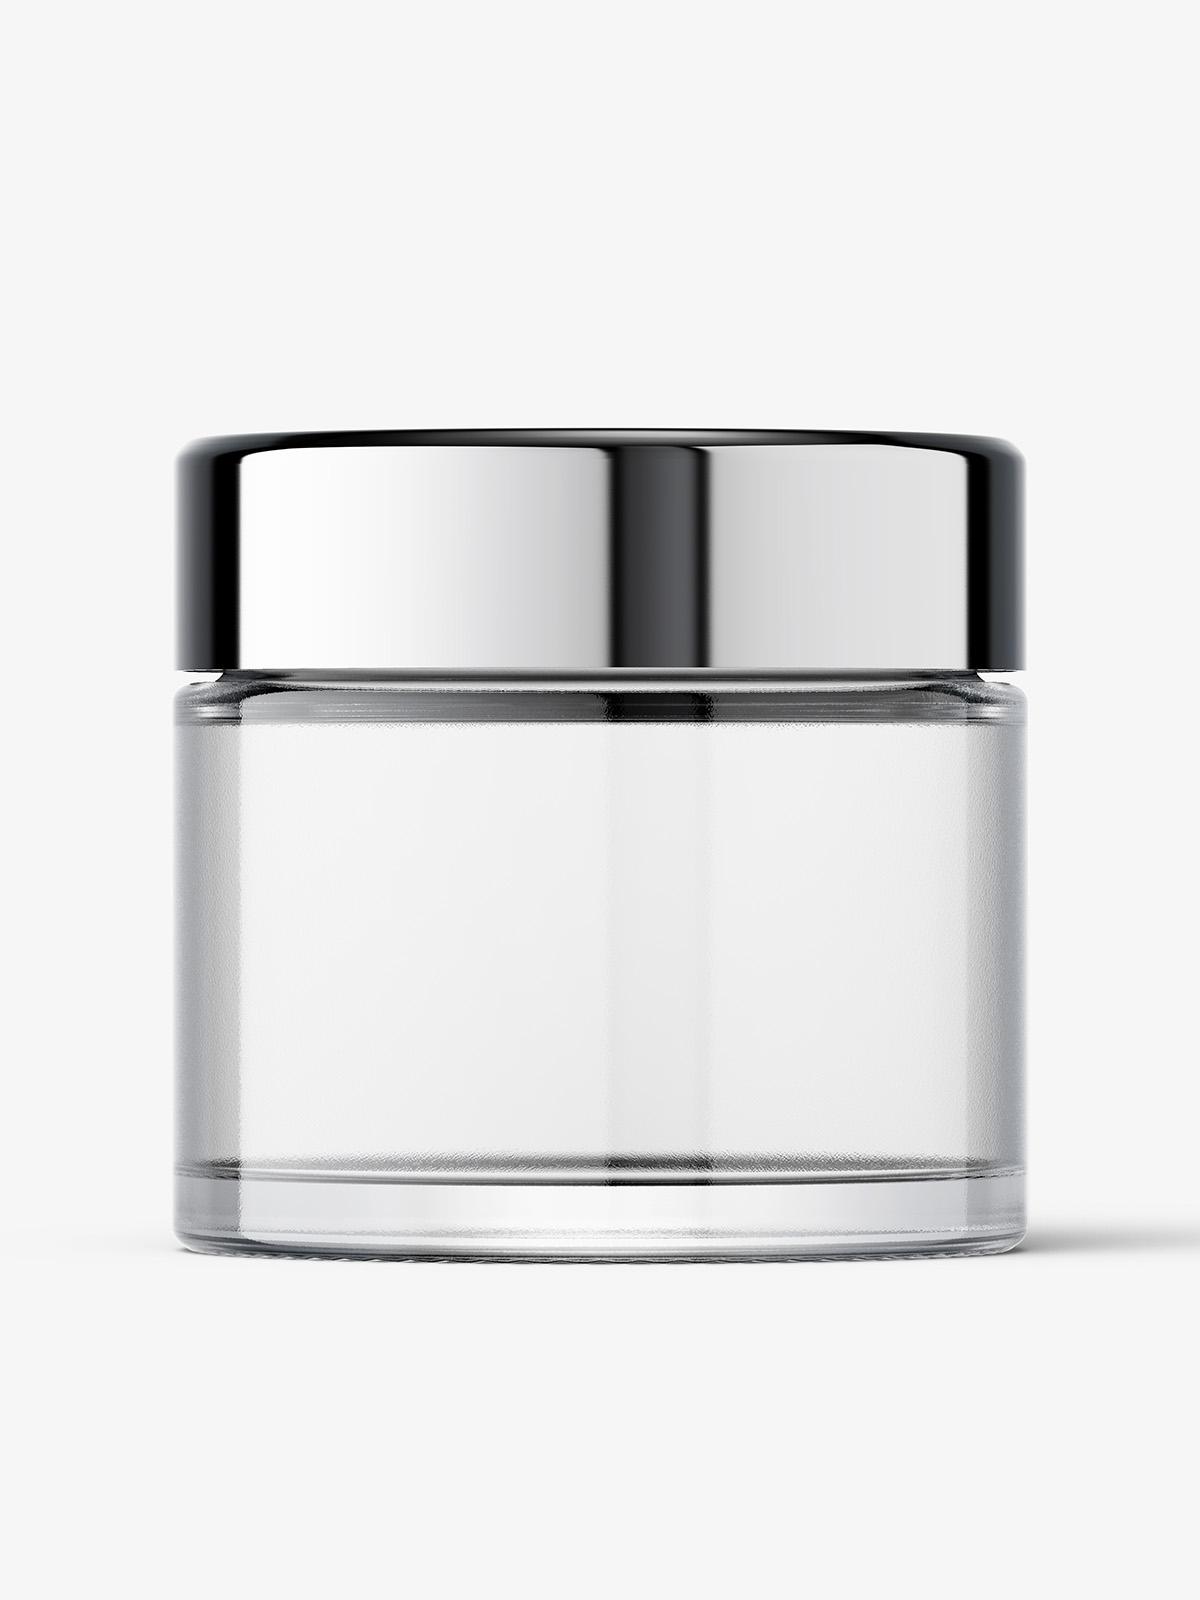 Clear Cosmetic Jar With Reflective Lid Mockup Smarty Mockups